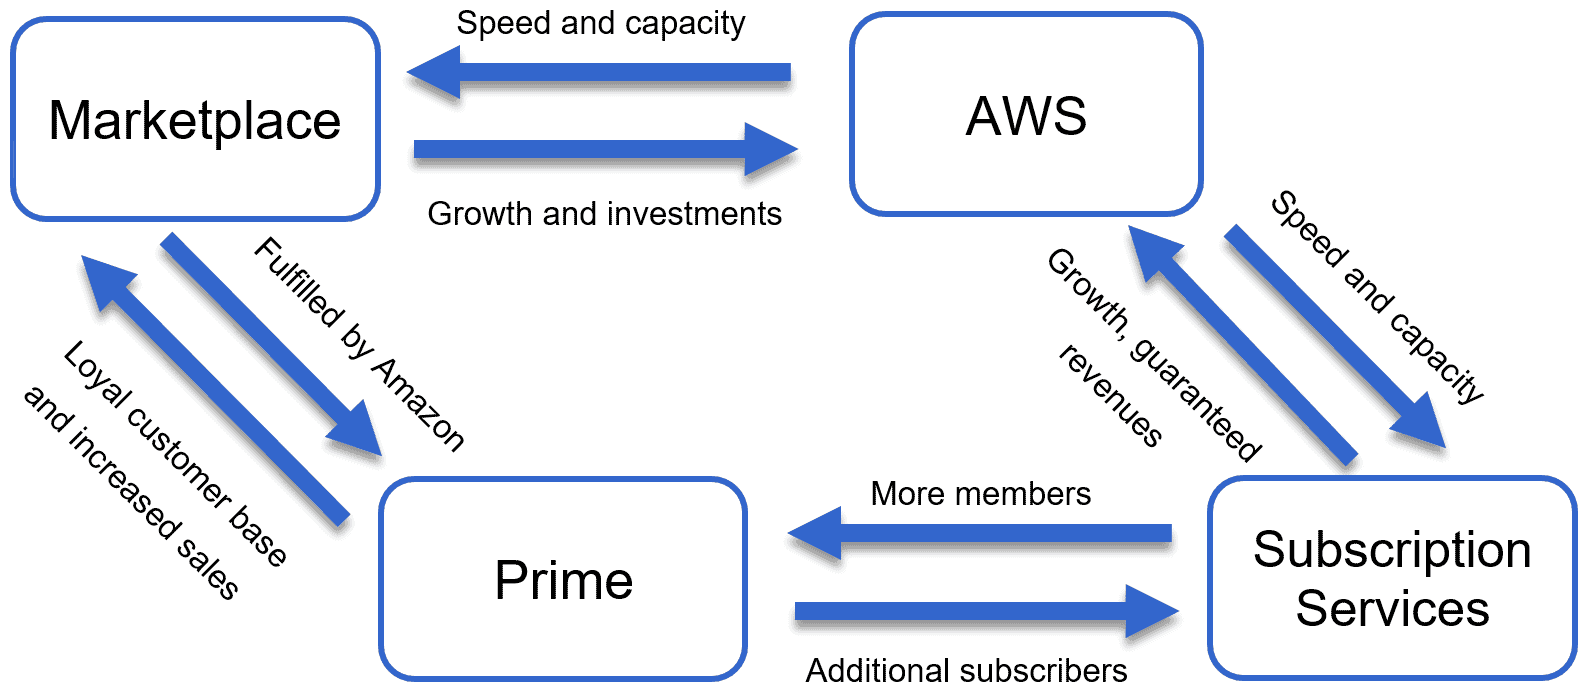 Amazon is involved in 3 key businesses: Amazon Marketplace, AWS and Amazon Prime.